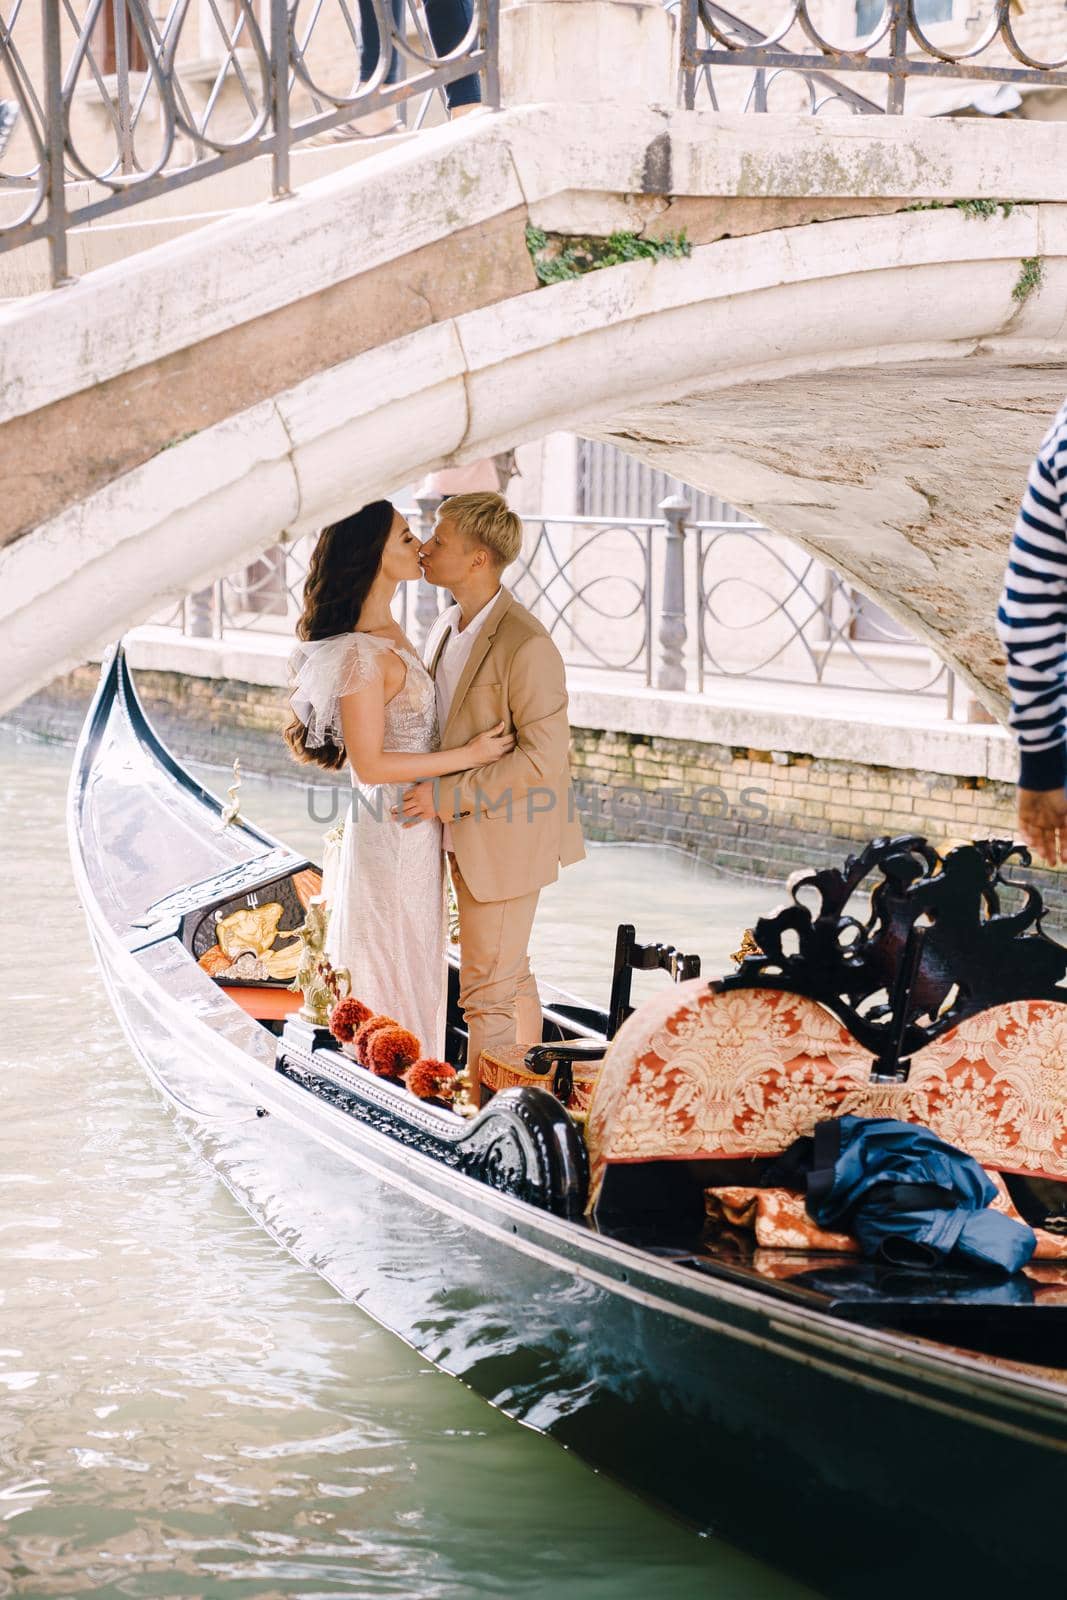 Italy wedding in Venice. A gondolier rolls a bride and groom in a classic wooden gondola along a narrow Venetian canal. Gondola floats under a stone bridge, the newlyweds kiss. by Nadtochiy